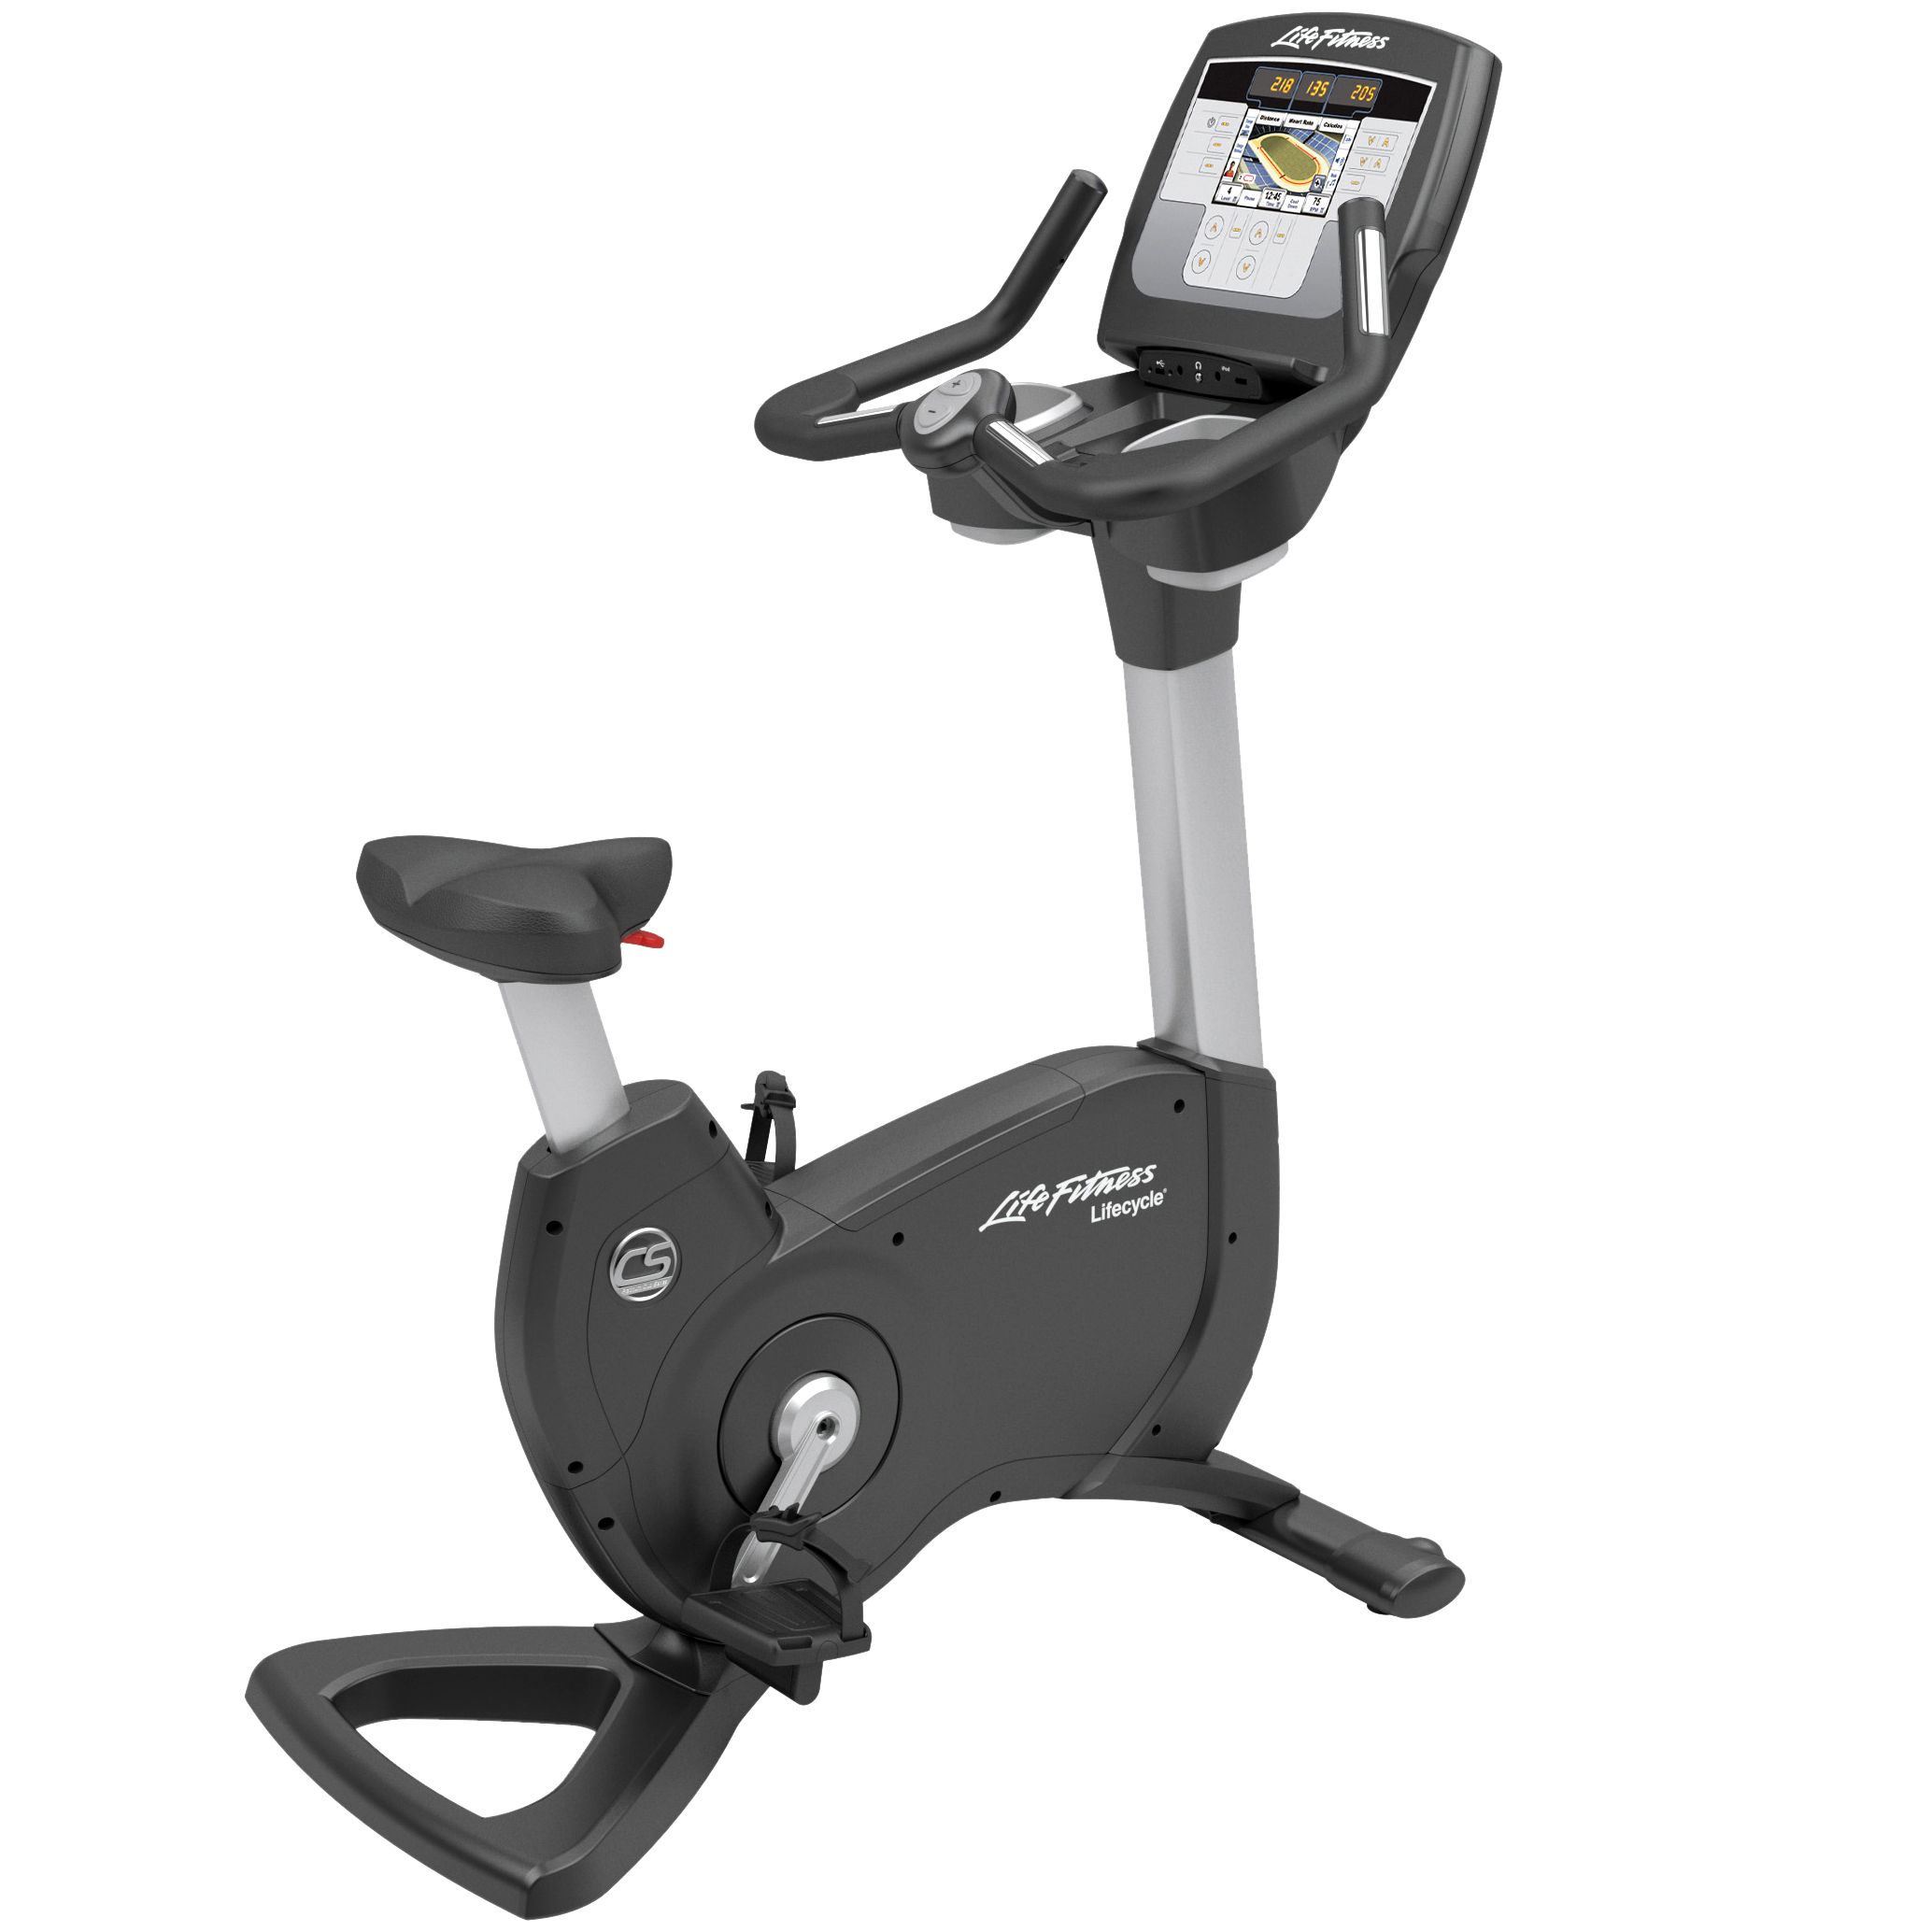 Life Fitness Platinum Club Series Lifecycle Inspire Upright Exercise Bike at John Lewis